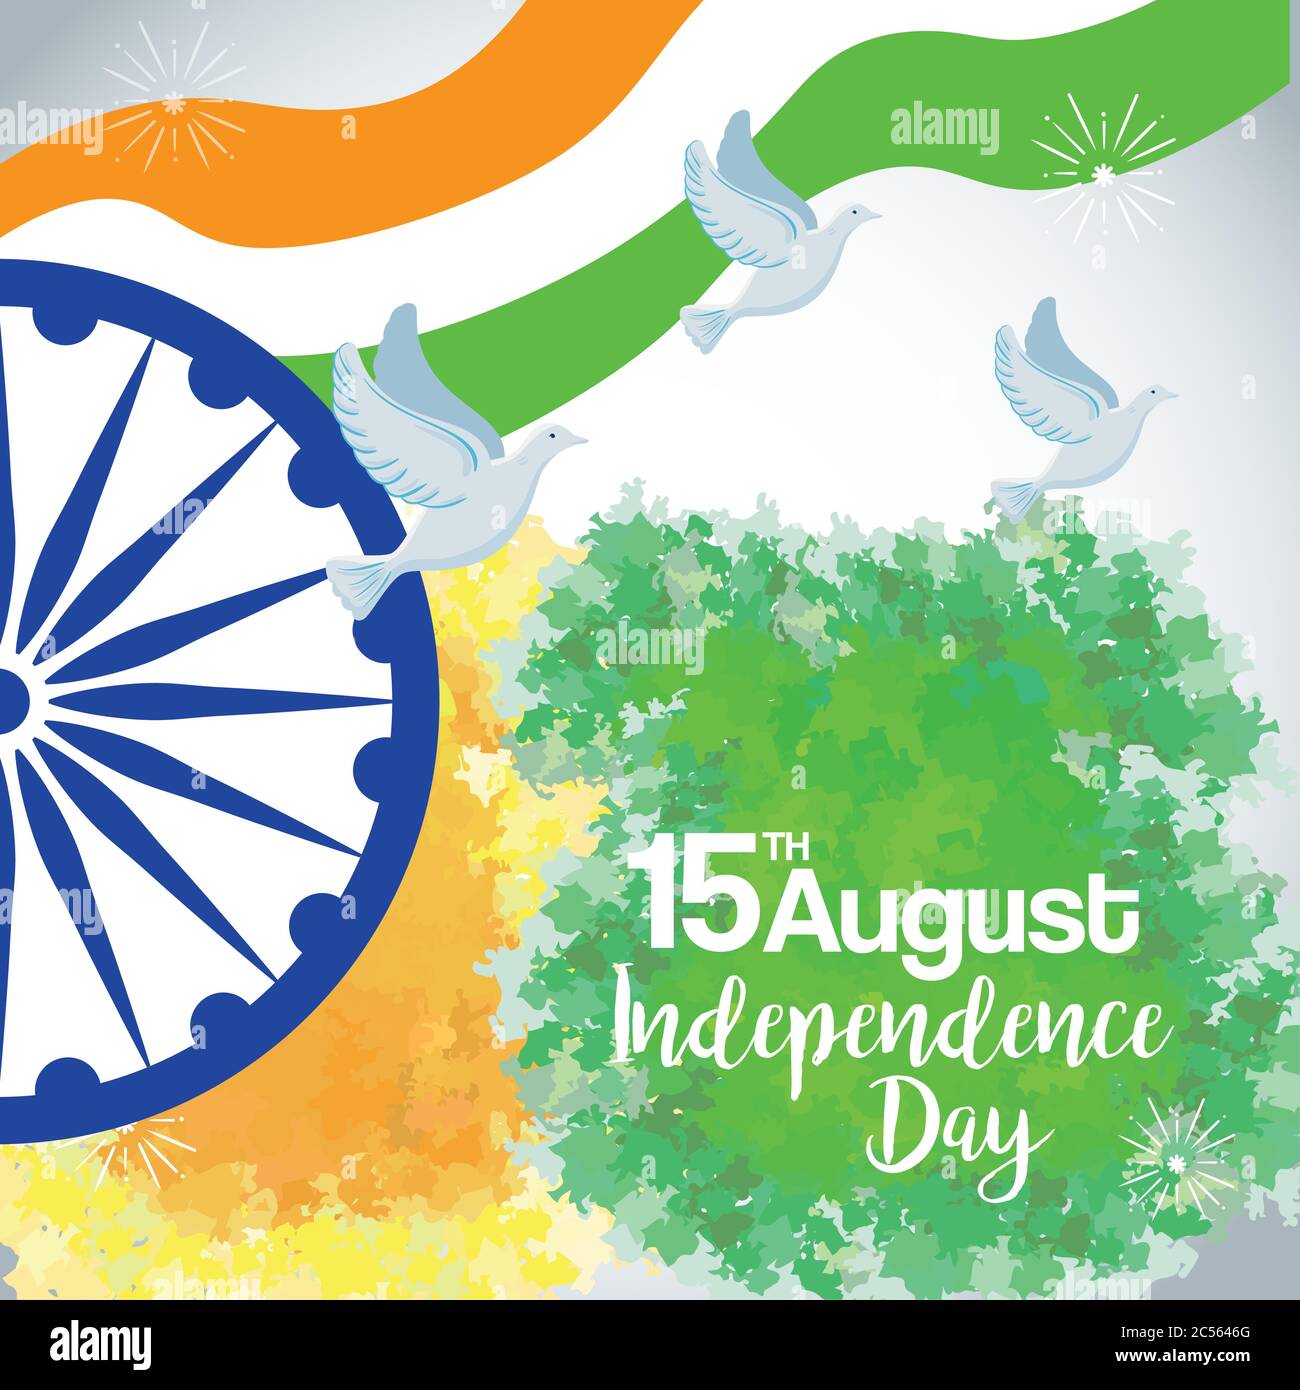 indian happy independence day, celebration 15 august, with ashoka ...